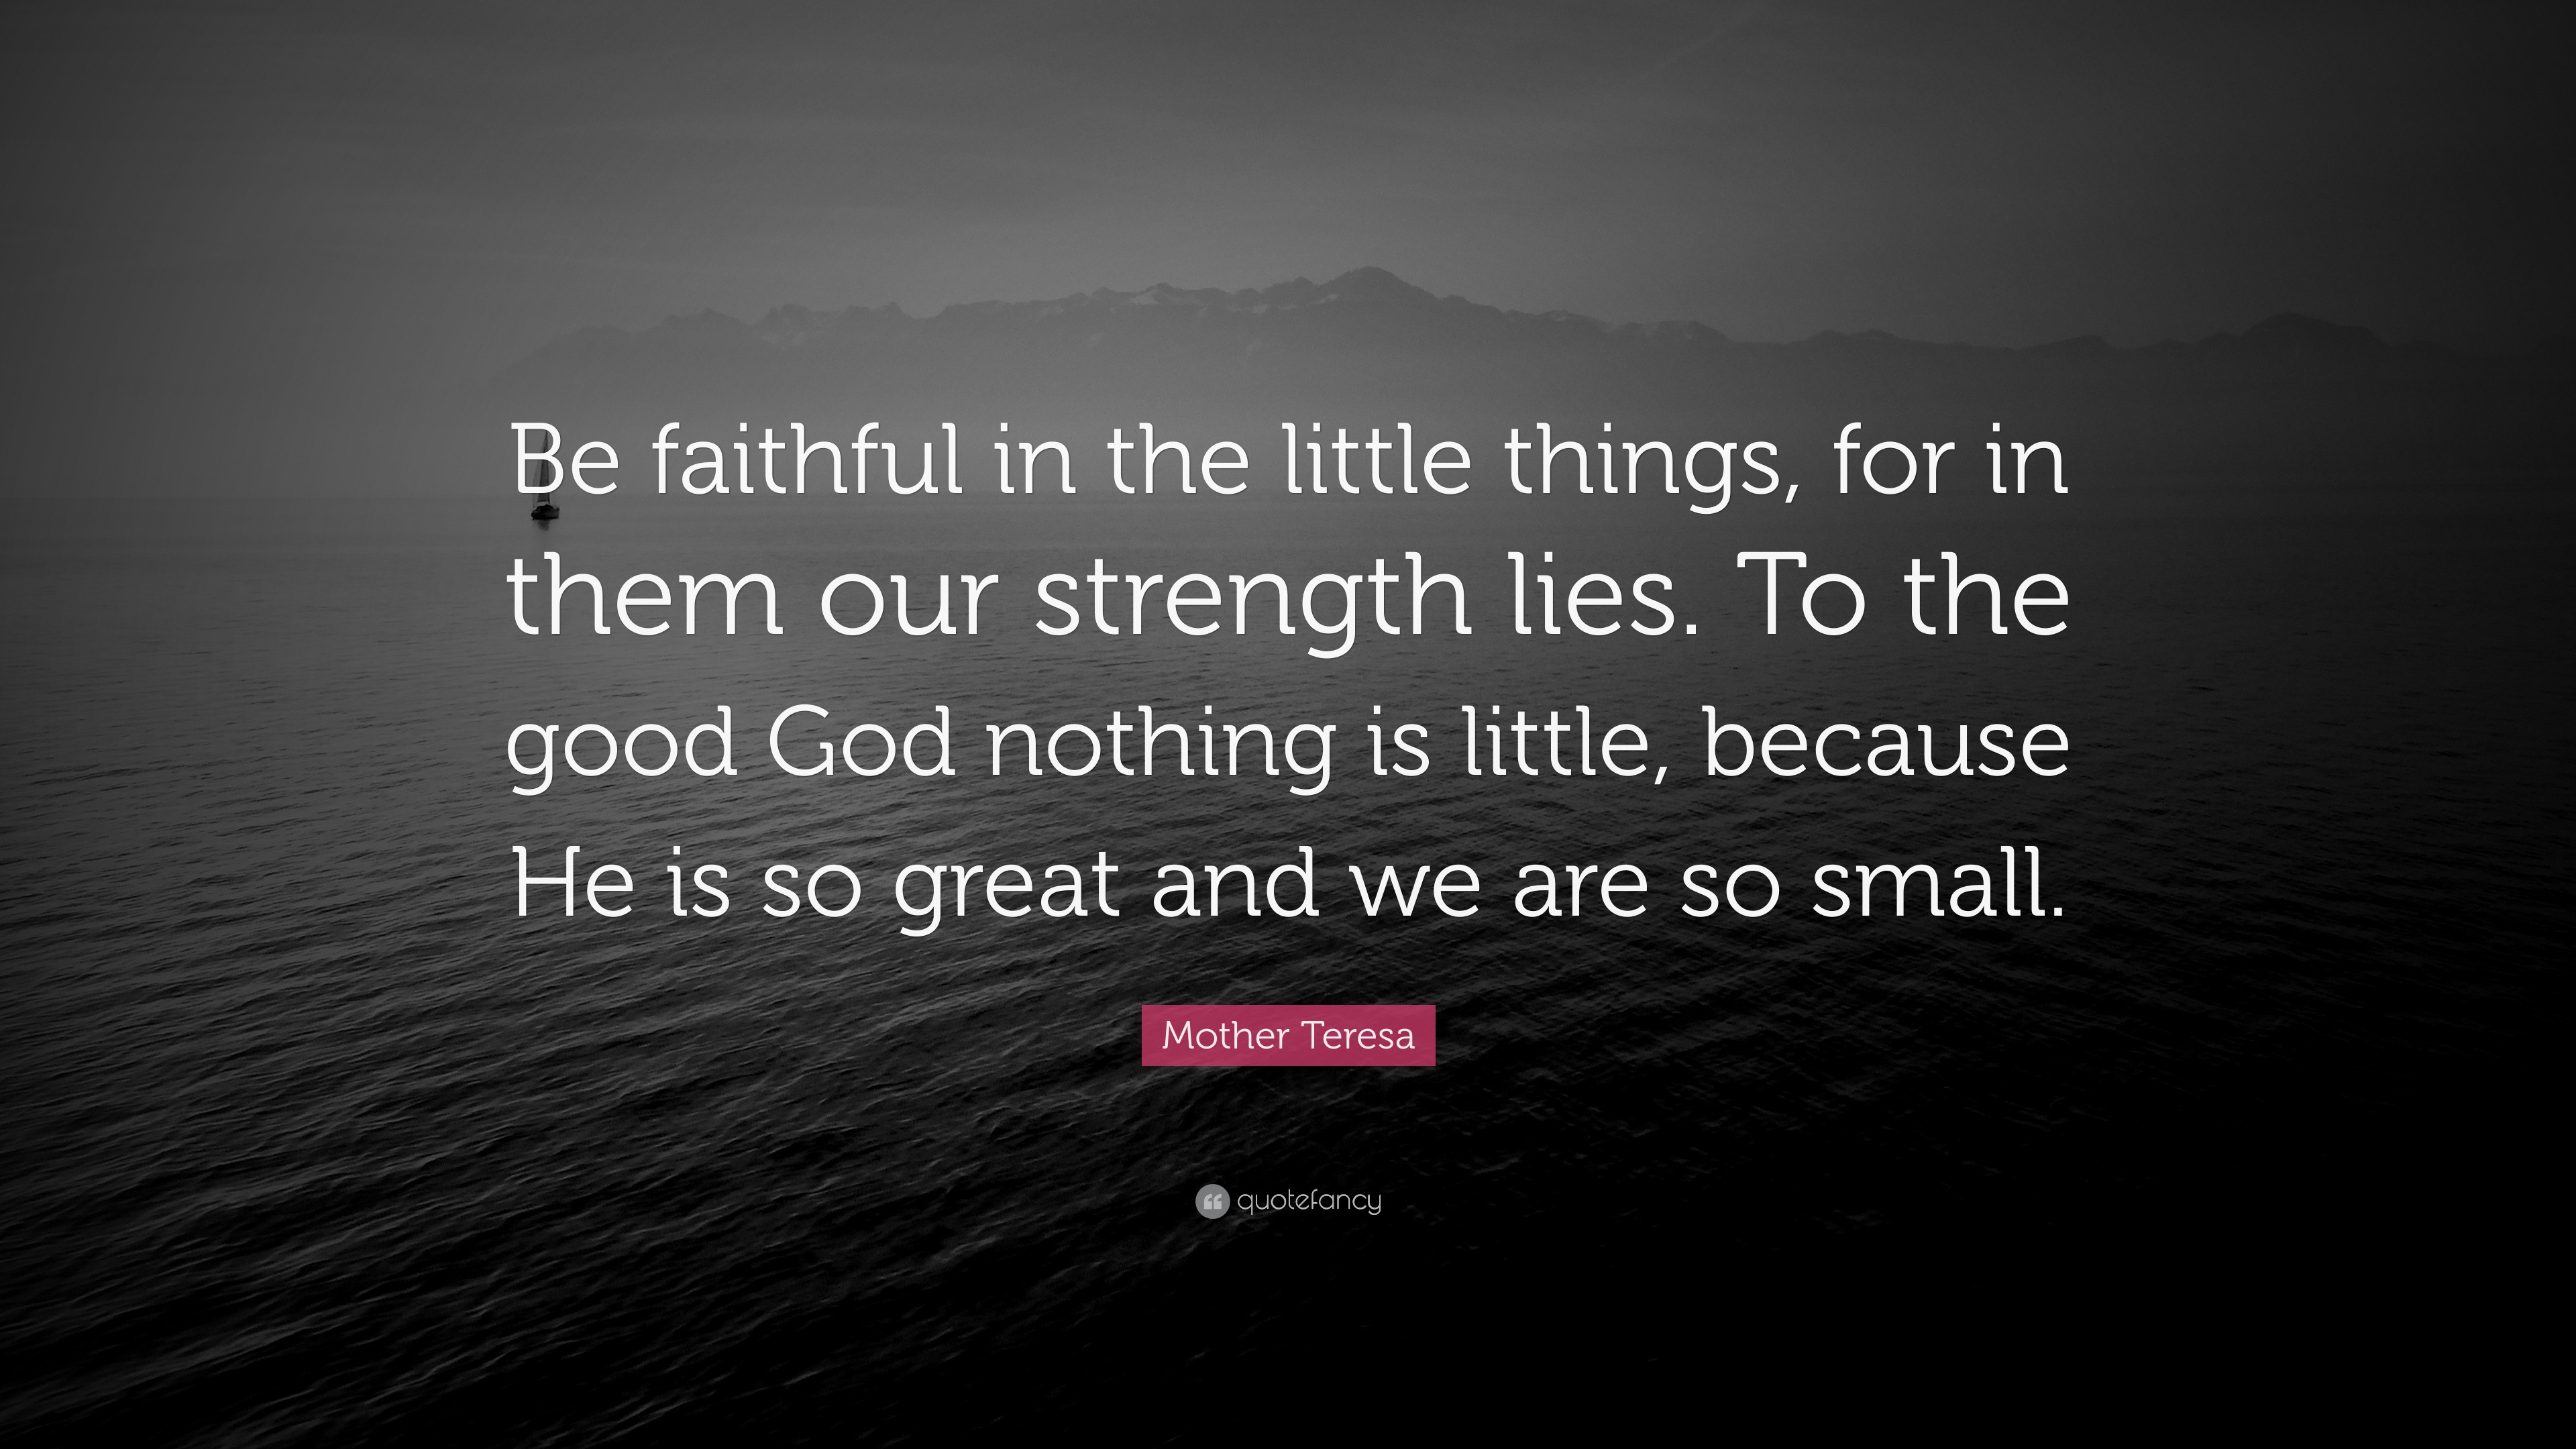 Mother Teresa Quote “Be faithful in the little things for in them our